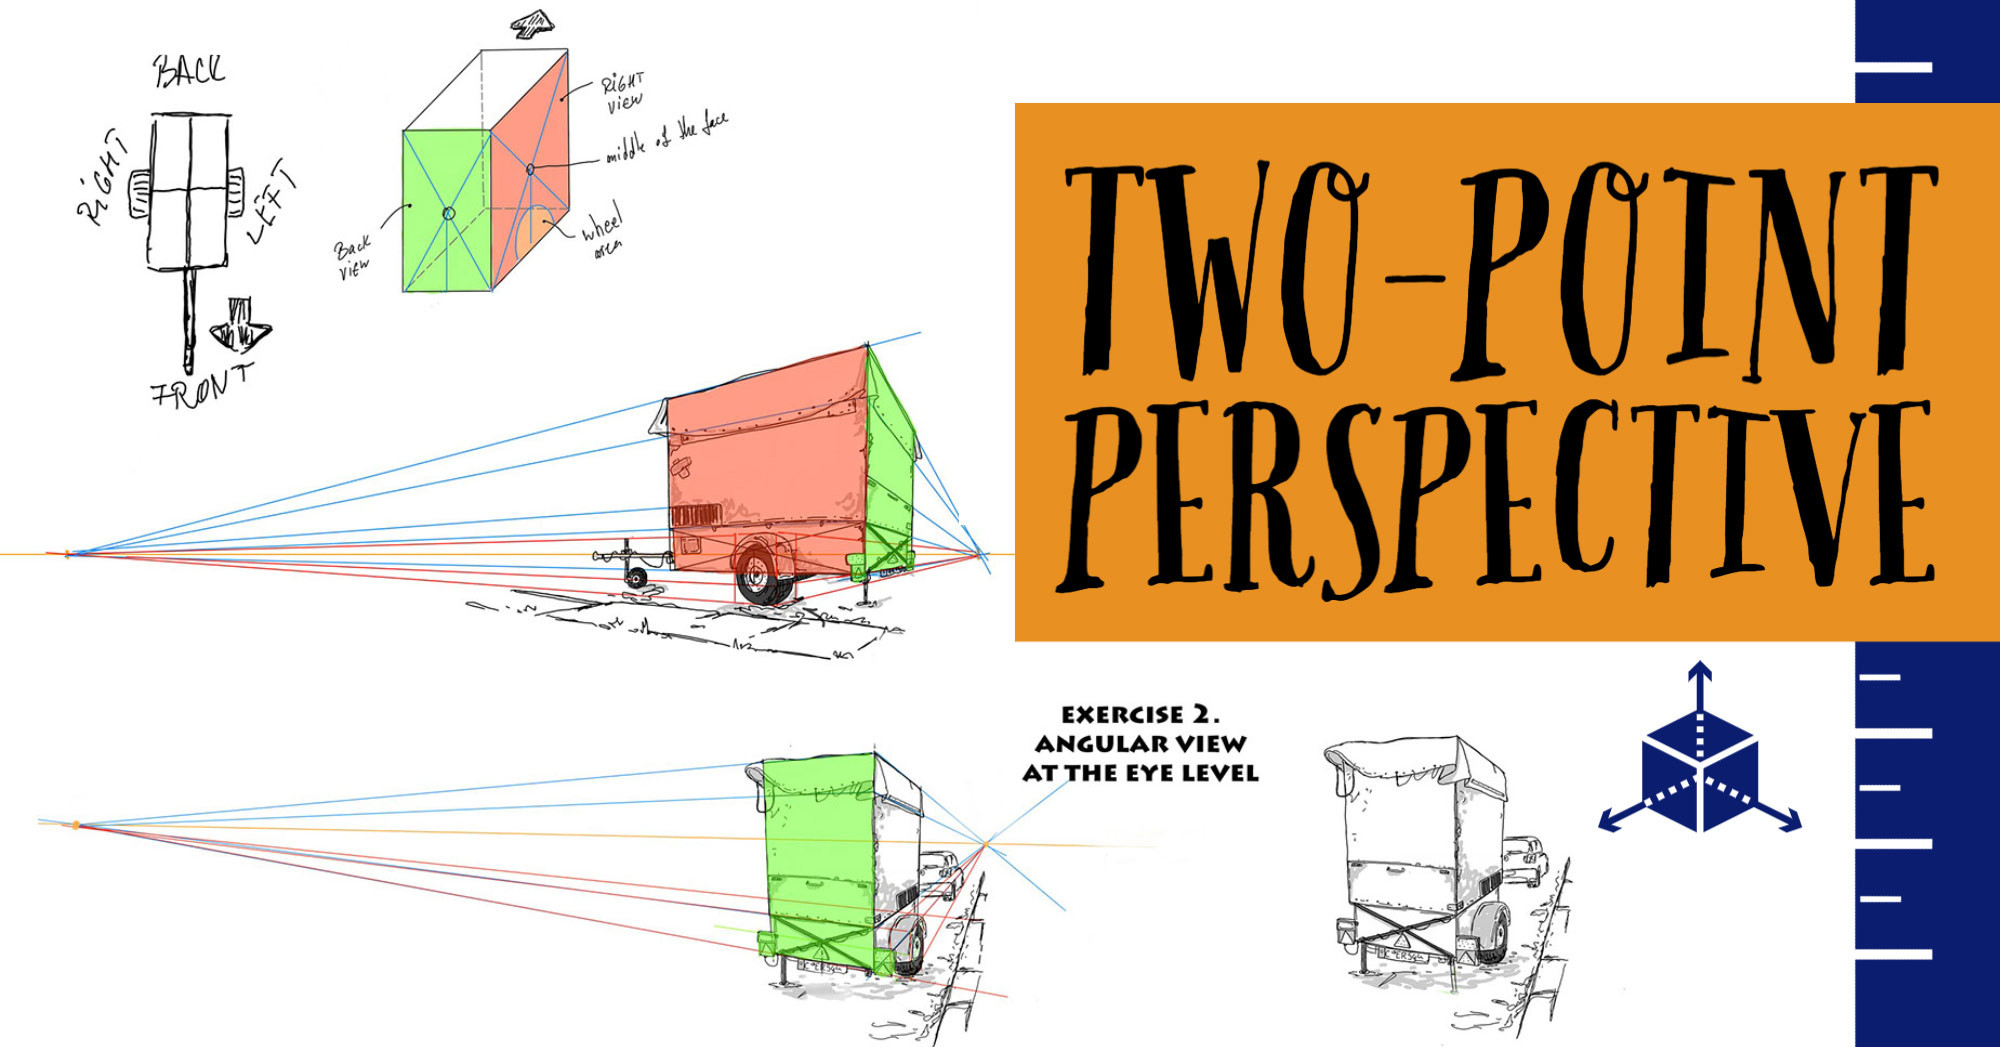 Article - Perspective Drawing Part 3. Two-Point Perspective https://www.cristinateachingart.com/practical-guide-in-perspective-drawing-part-3-two-point-perspective-drawing/